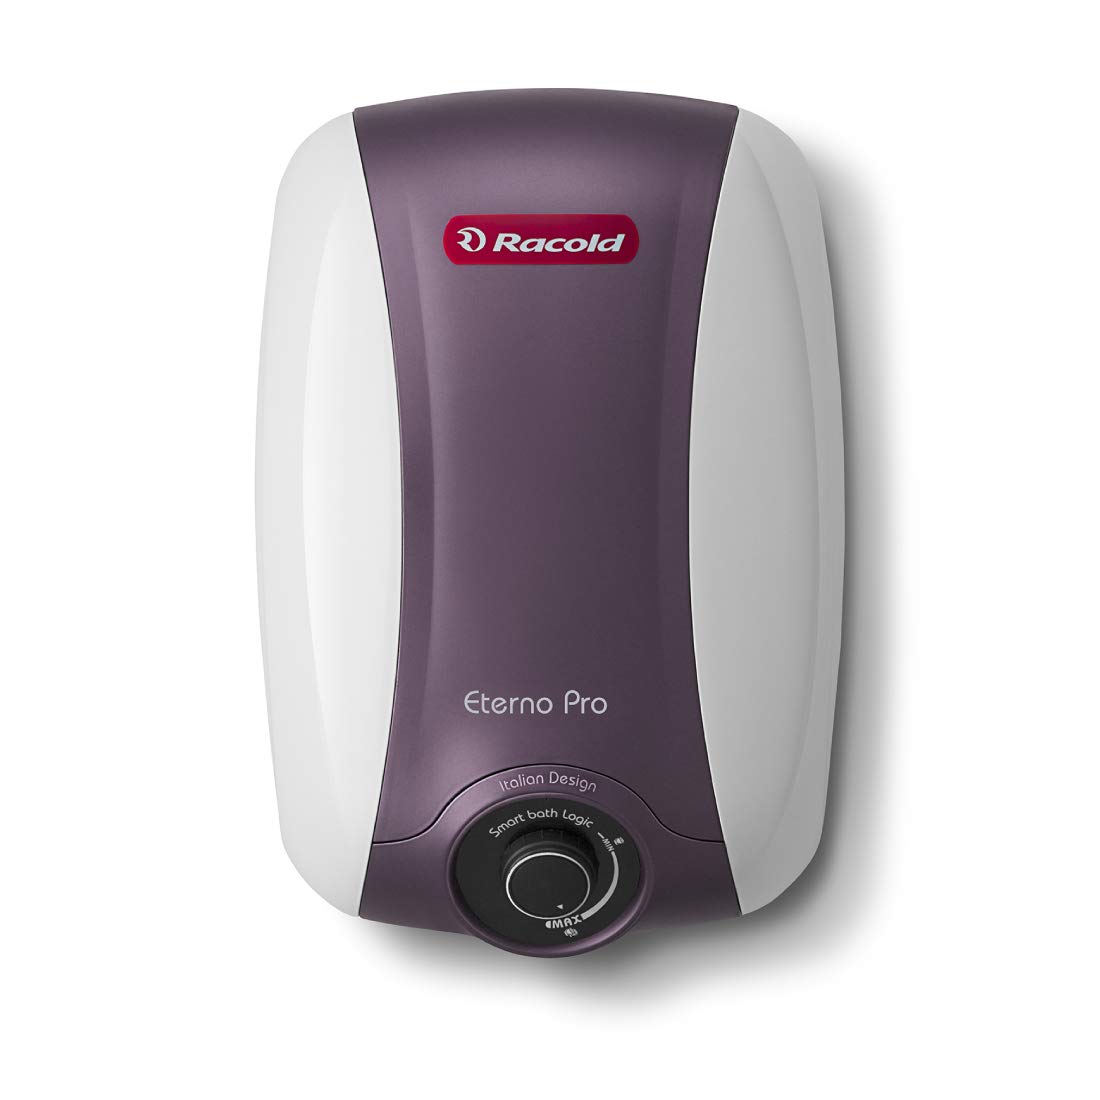 racold eterno pro 15L water heater